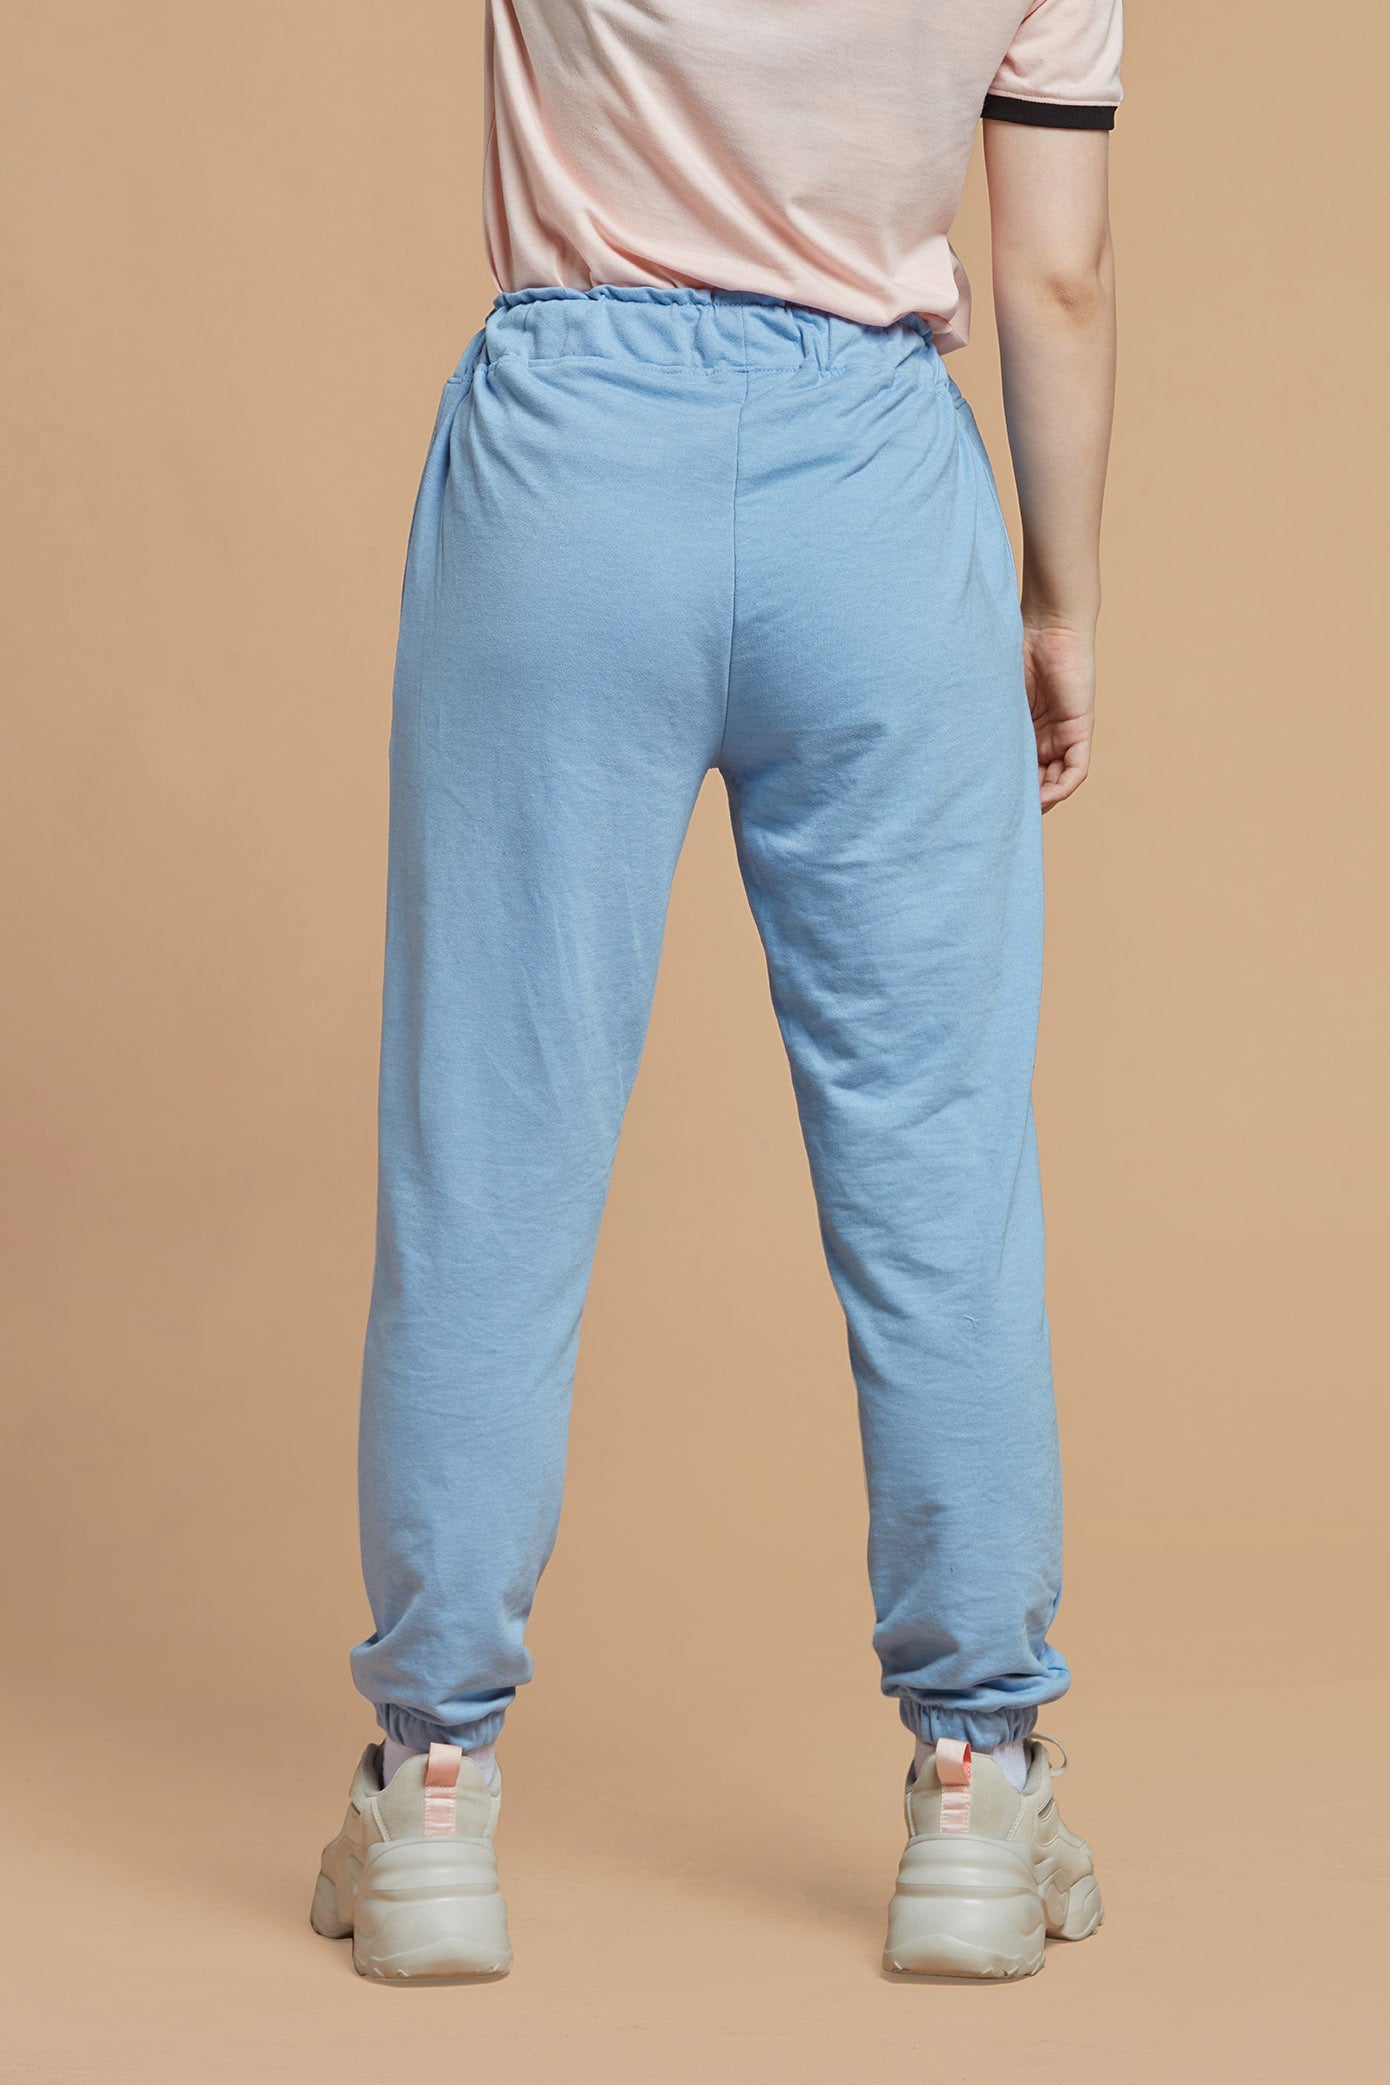 Topshop cord utility straight leg pants in baby blue | ASOS